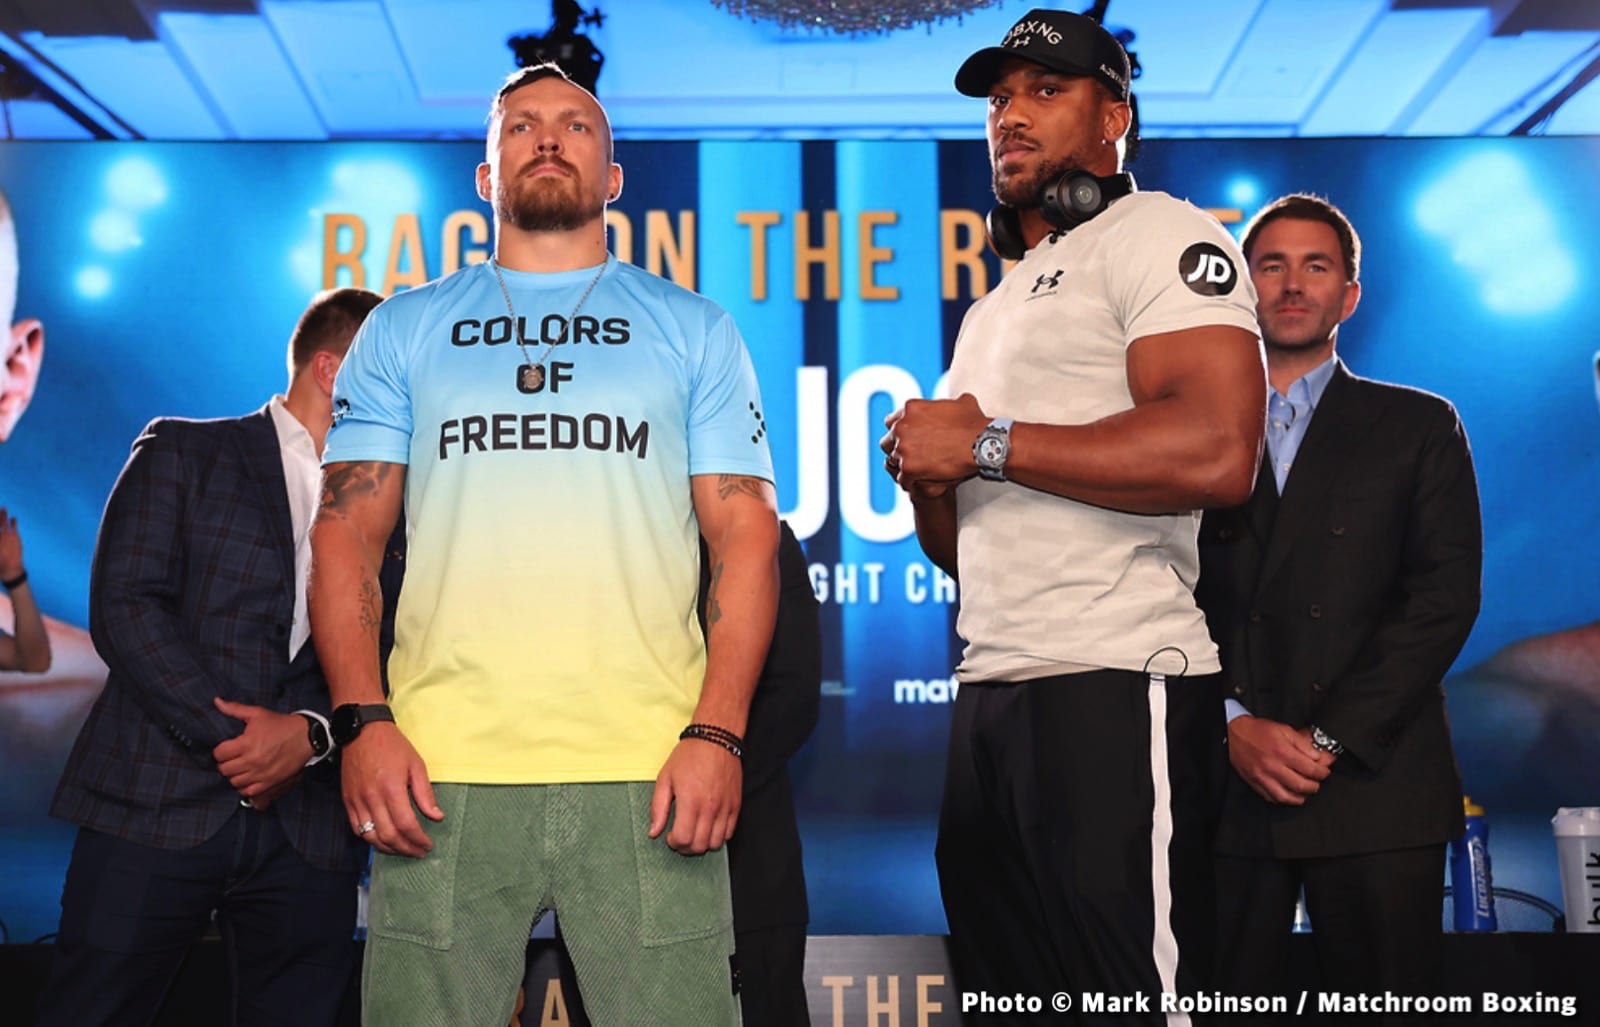 Image: Joshua vs. Usyk II to be shown on Sky Sports Box Office in UK, not DAZN